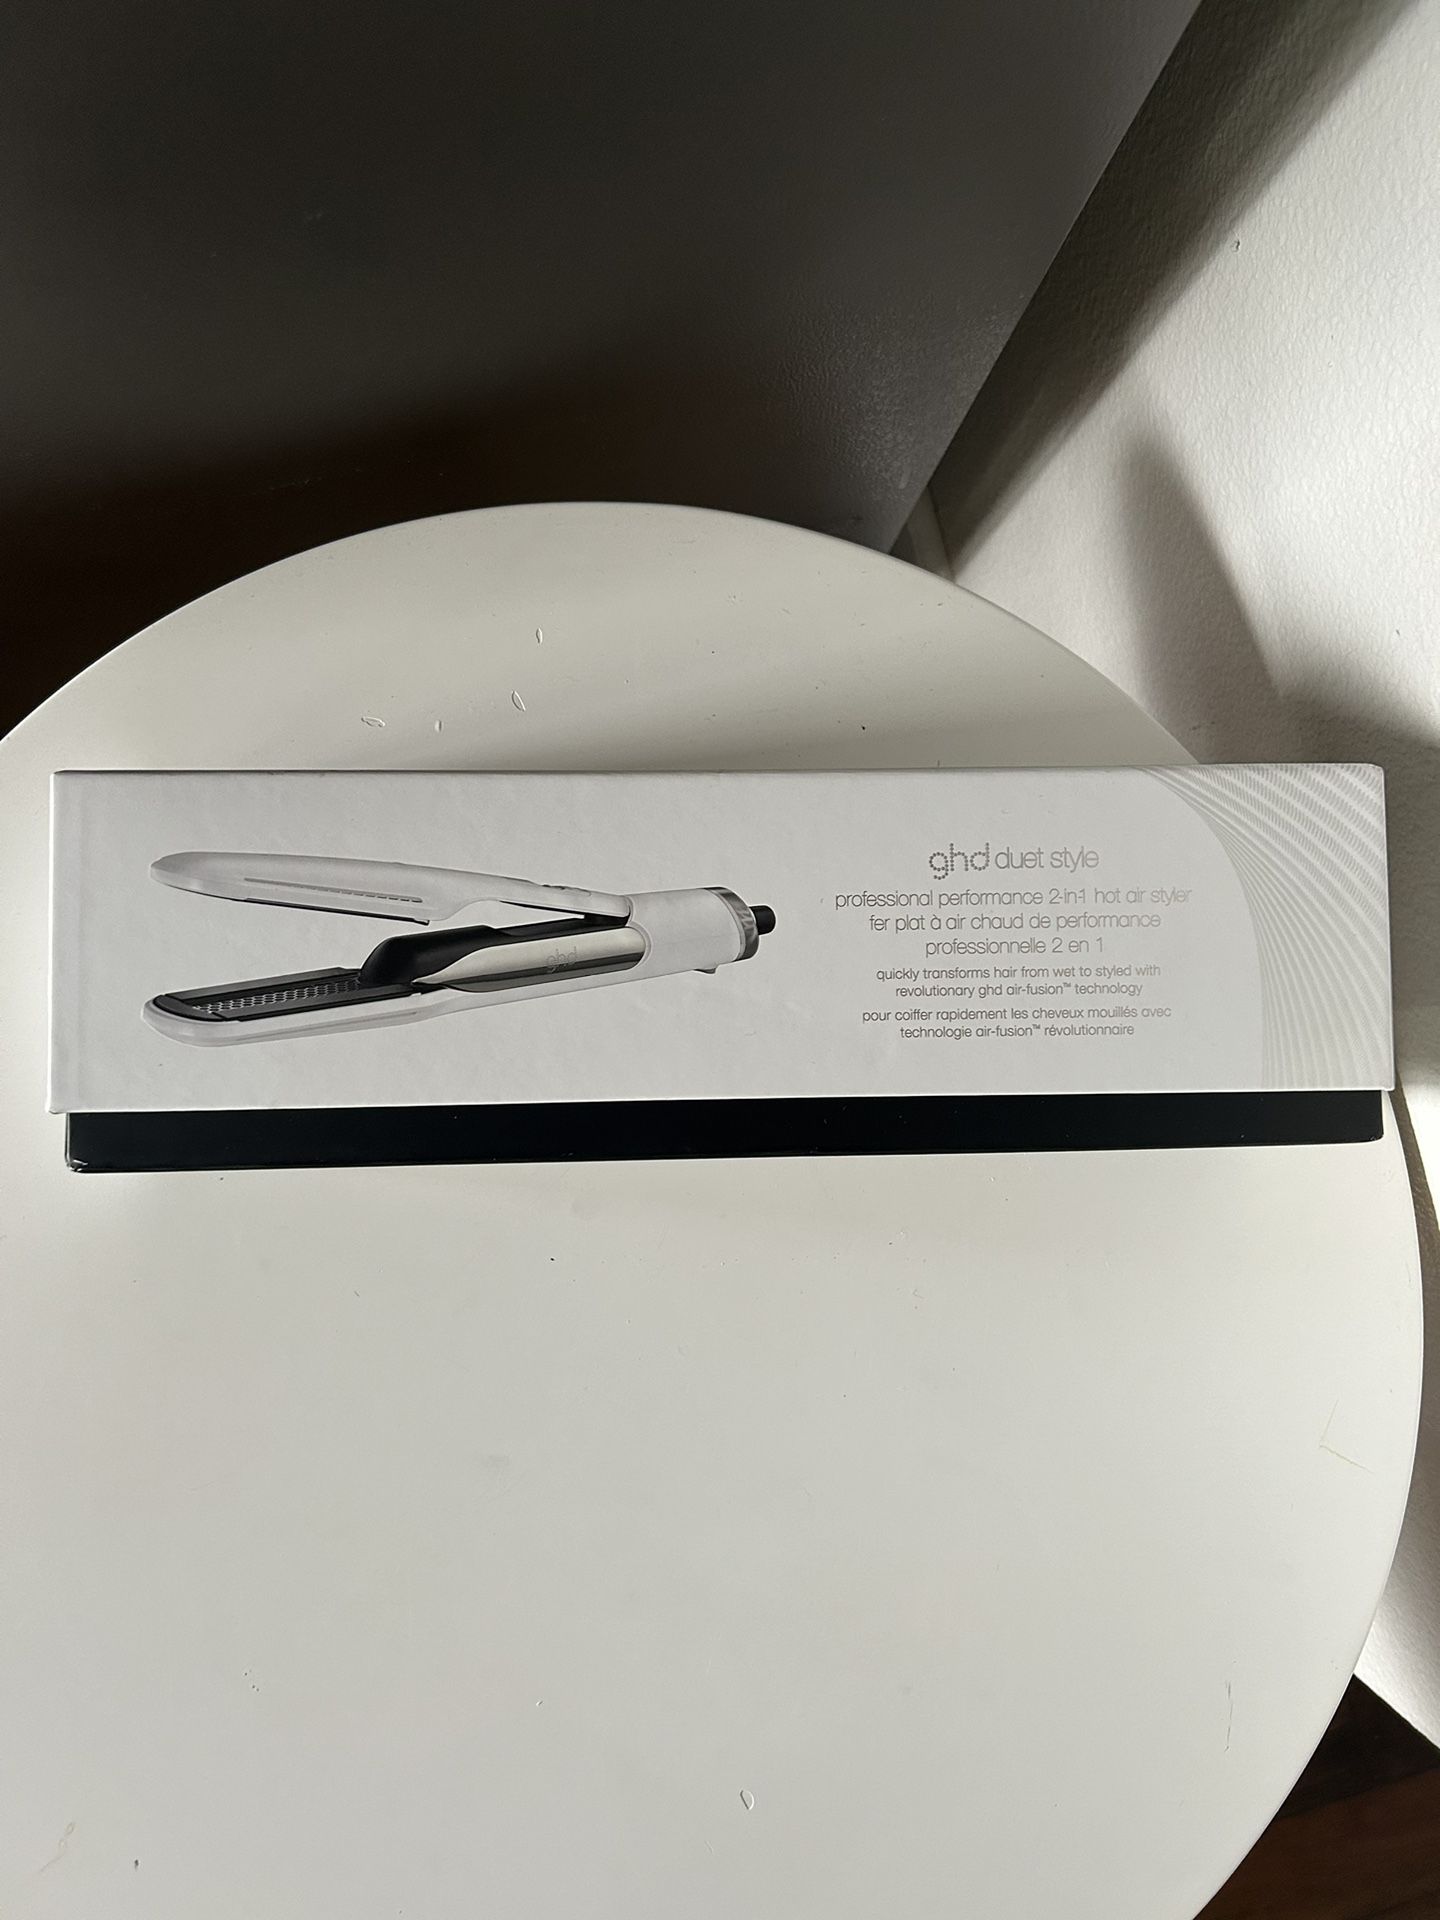 ghd Duet Style ― 2-in-1 Flat Iron Hair Straightener + Hair Dryer, Hot Air Styler to Transform Hair from Wet to Styled ― White